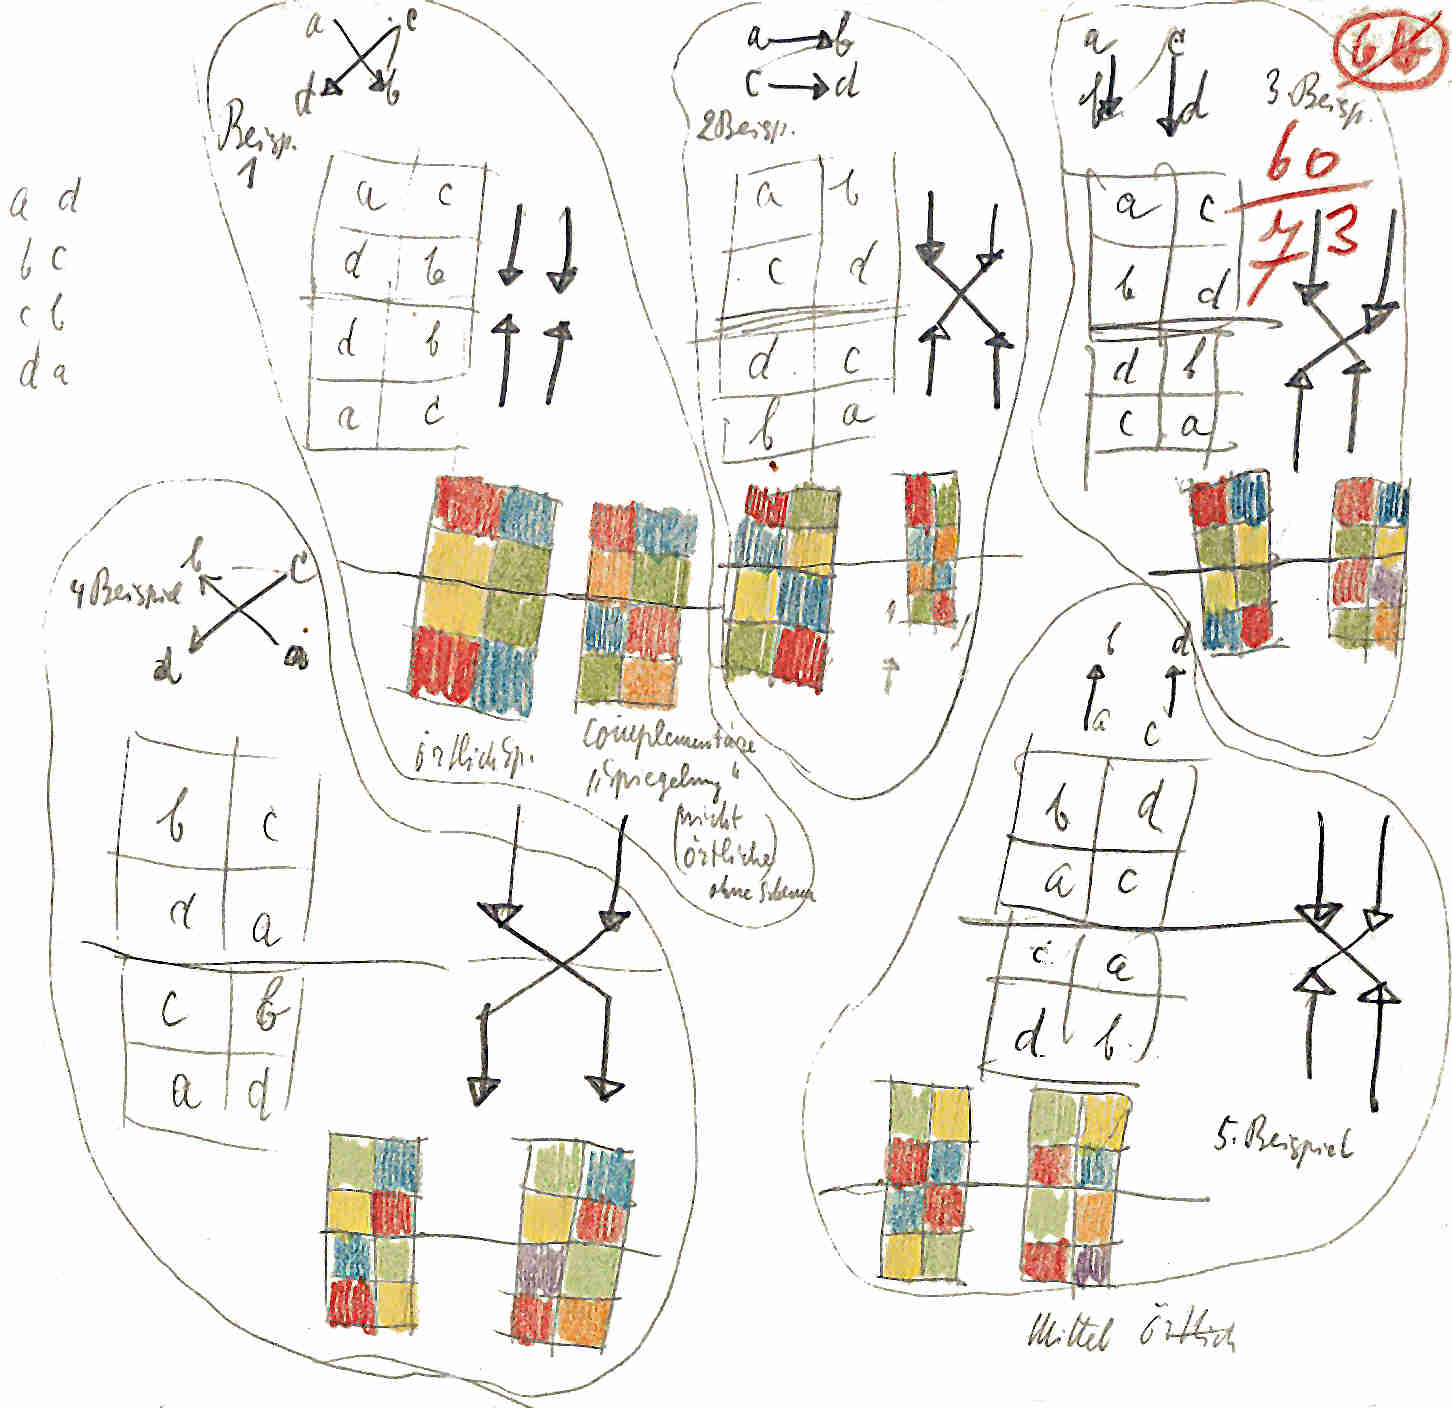 details from the Paul Klee notebook